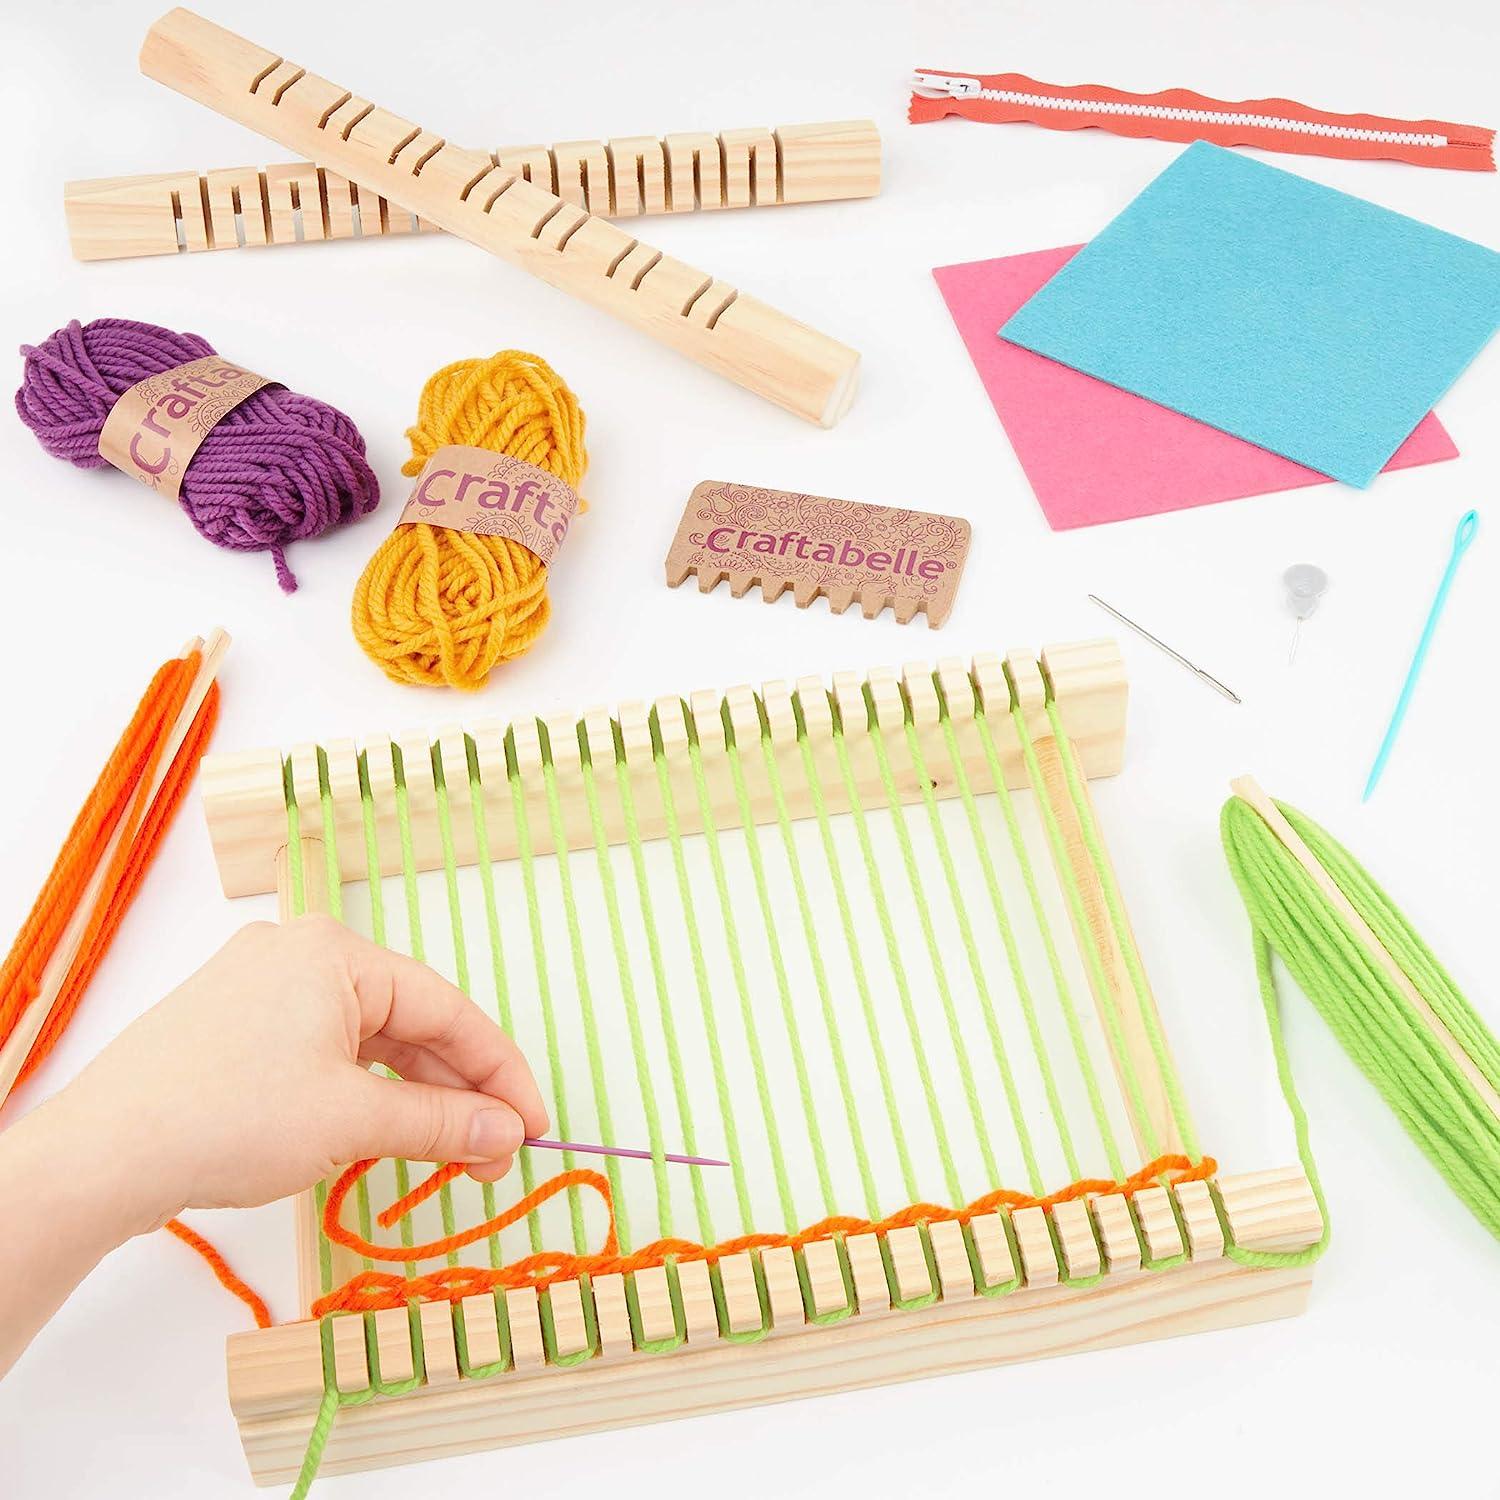 Craftabelle Wooden Loom Creation Kit Beginner Knitting Loom Kit 19pc  Weaving Set with Yarn and Frame DIY Craft Kits for Kids Aged 8 Years +